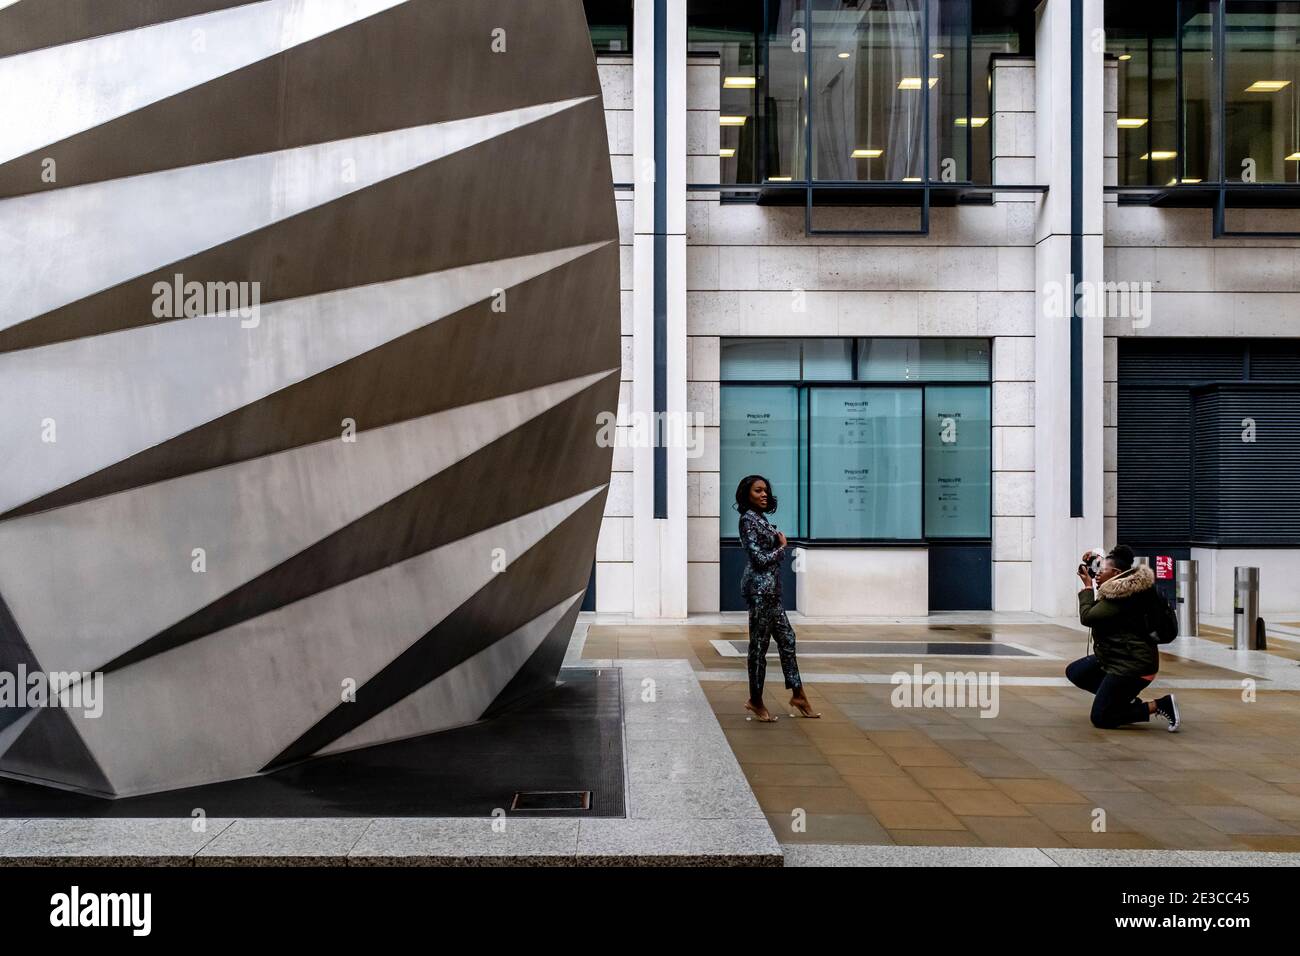 A Young Woman Taking Photographs At The Paternoster Vents, London, UK. Stock Photo